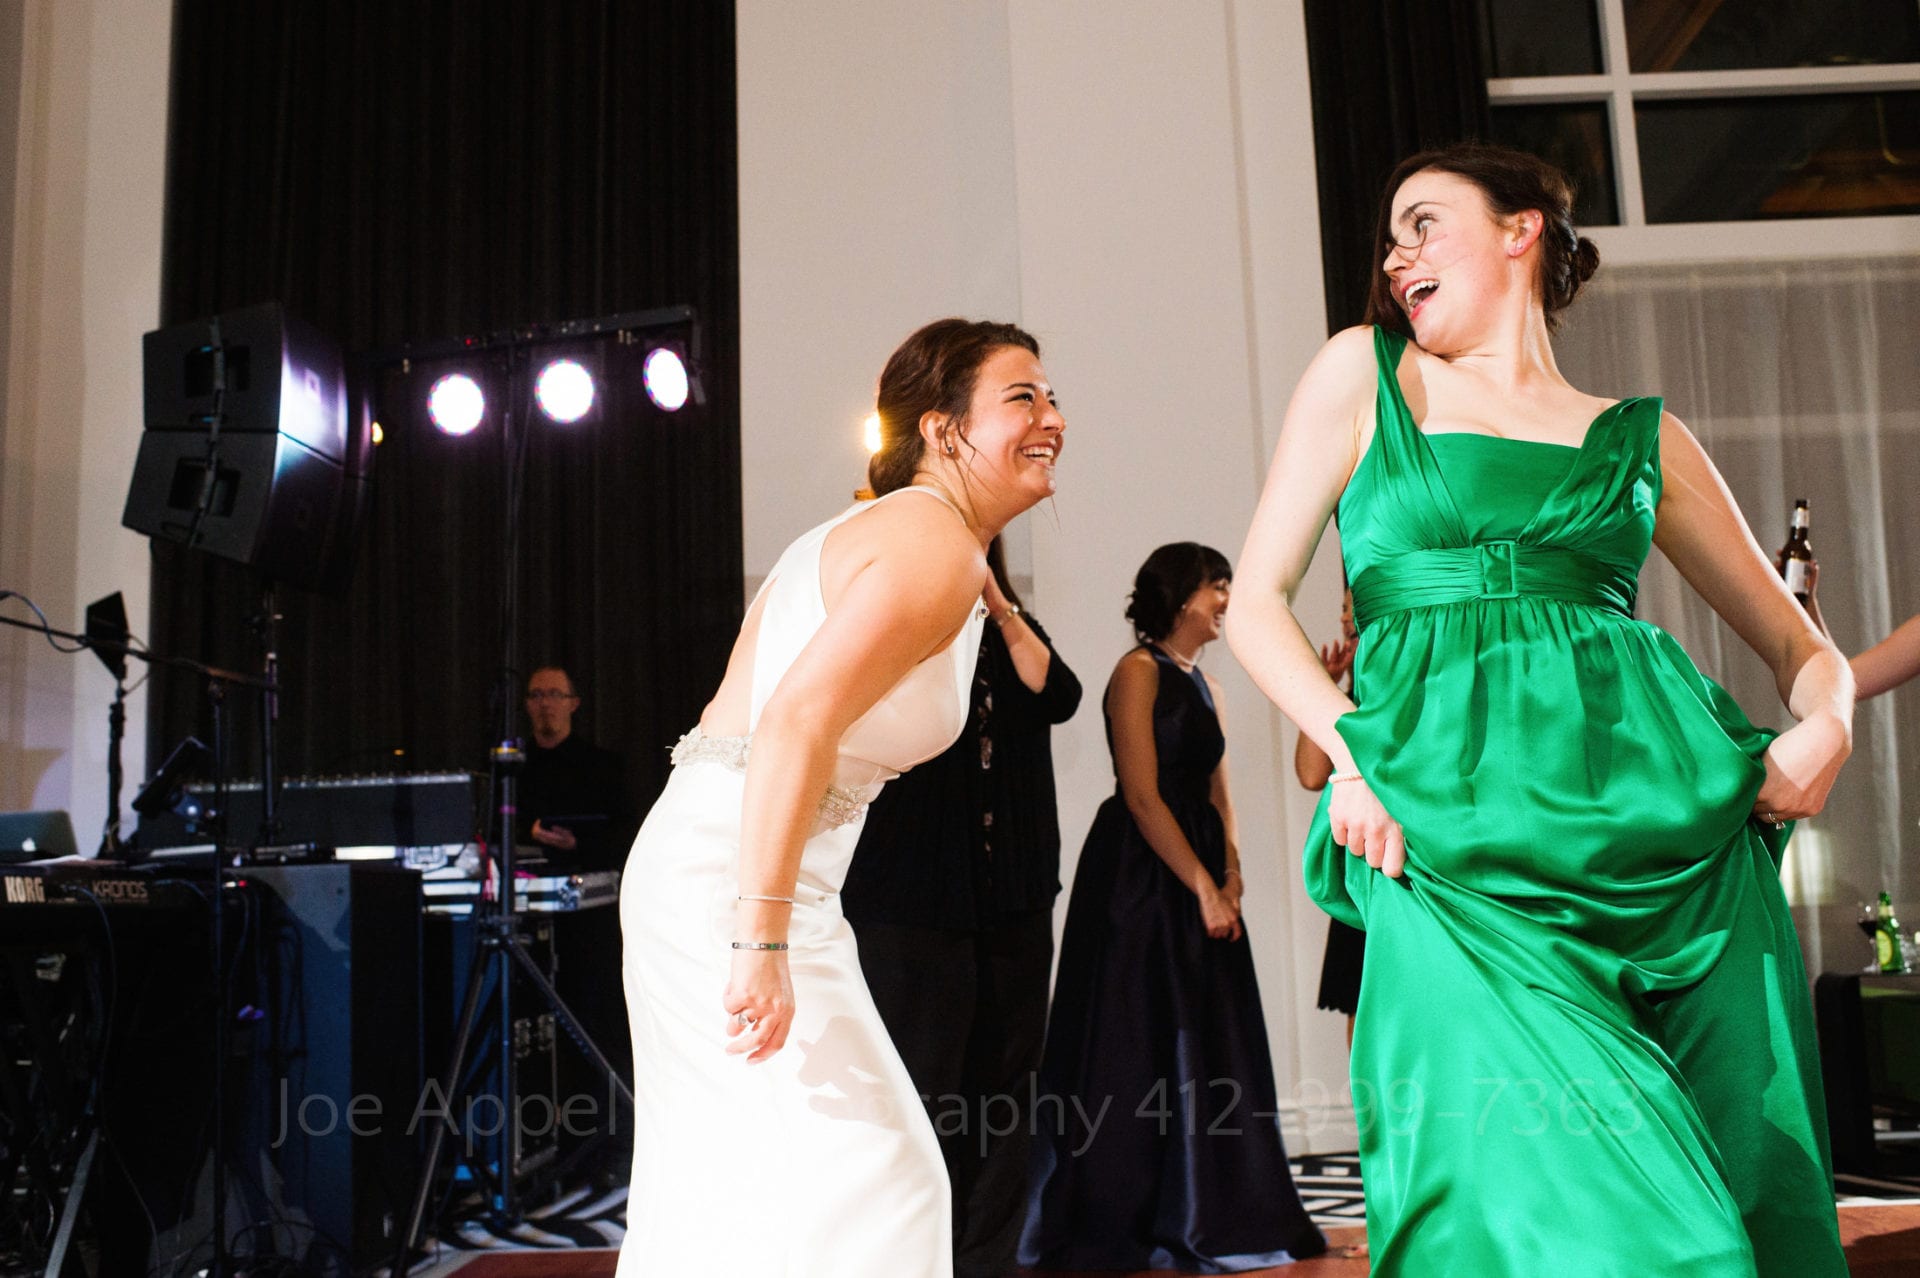 a bridesmaid in a green dress laughs and dances with the bride